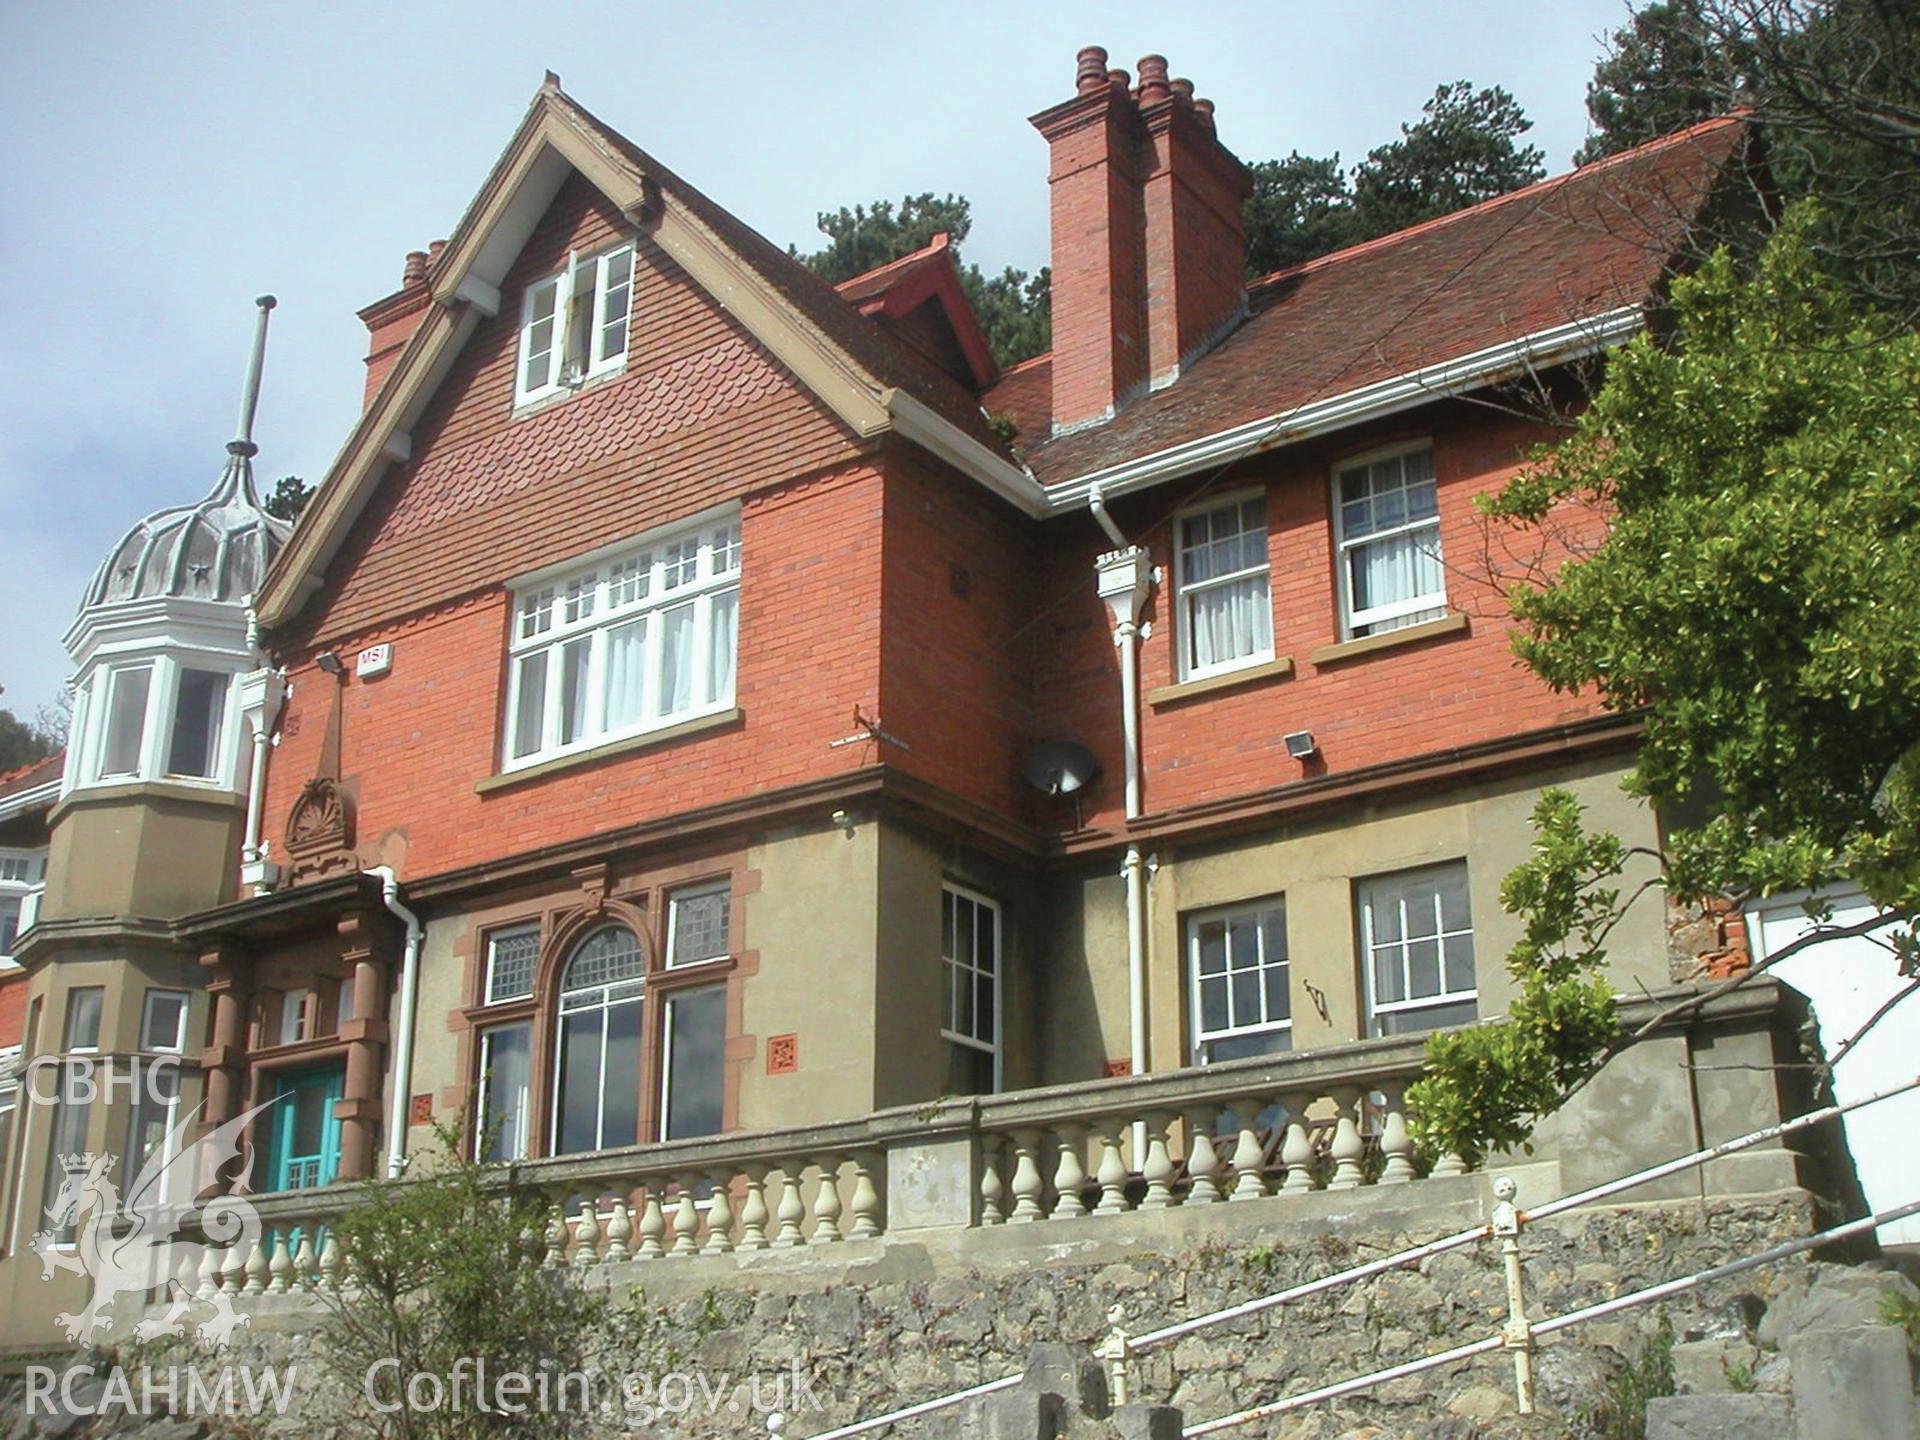 Digital image of Glan Orme, Llandudno: 'Herbert Luck North. Arts and Crafts Architecture for Wales', page 11.